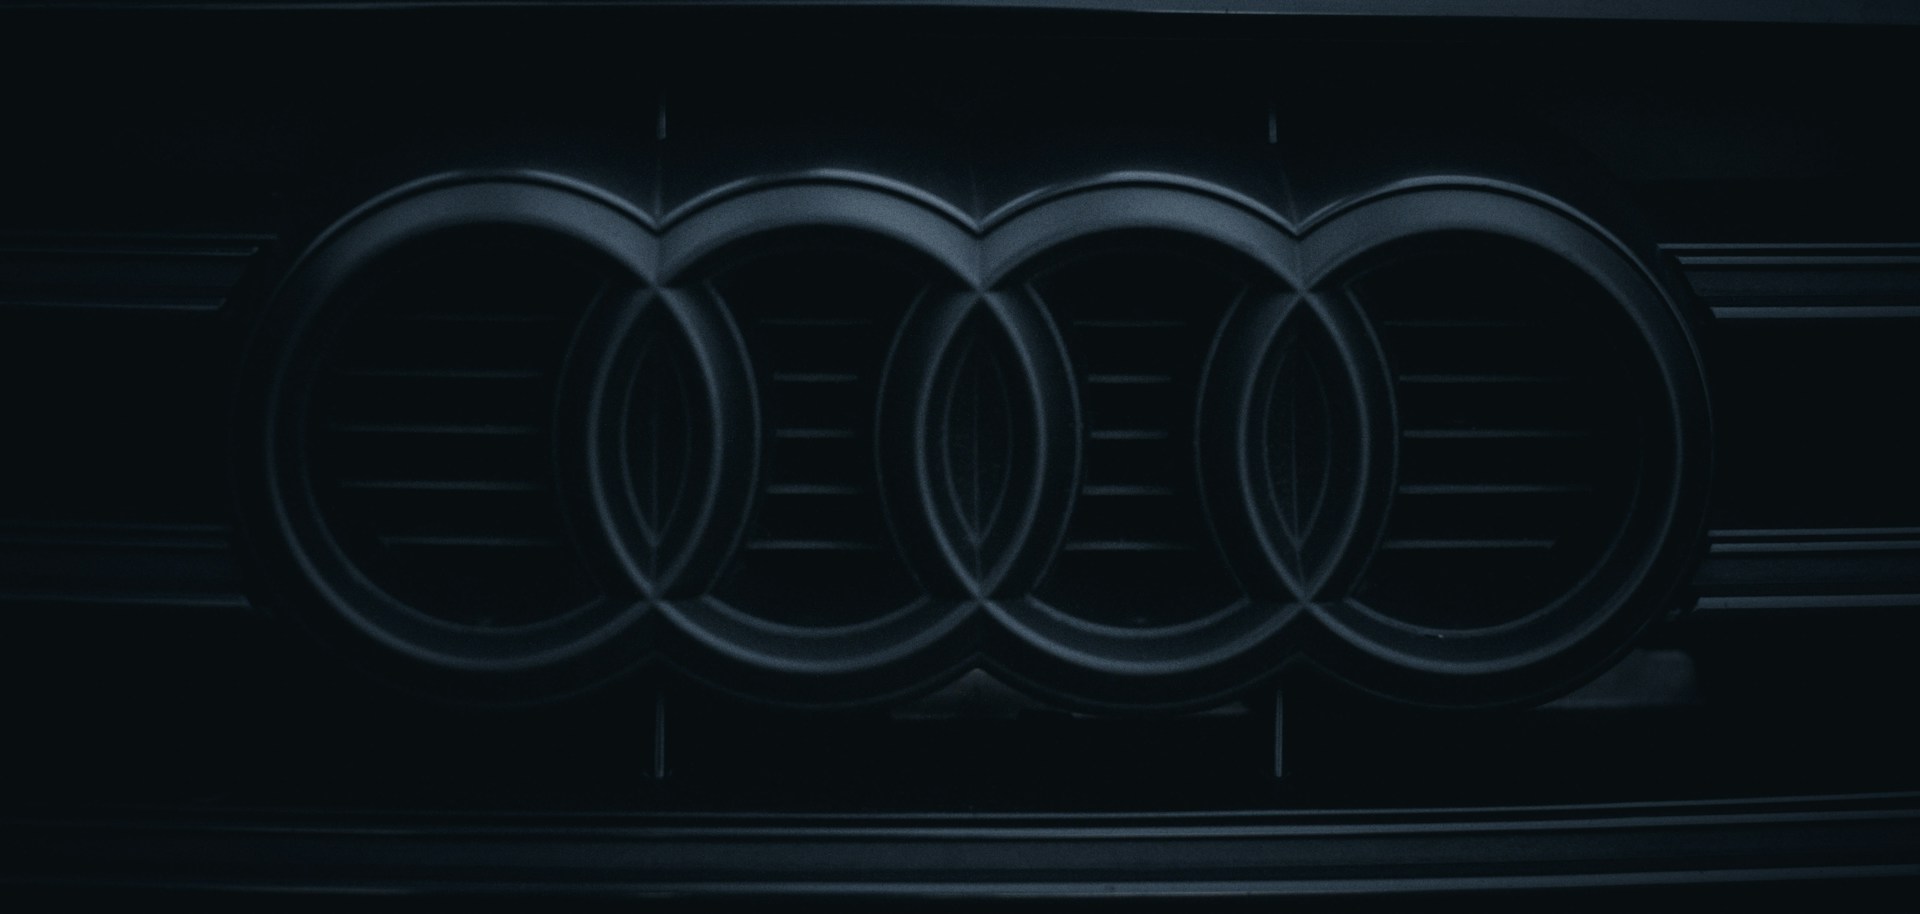 A close-up photo of a black and silver Audi logo on the front grille of a car.